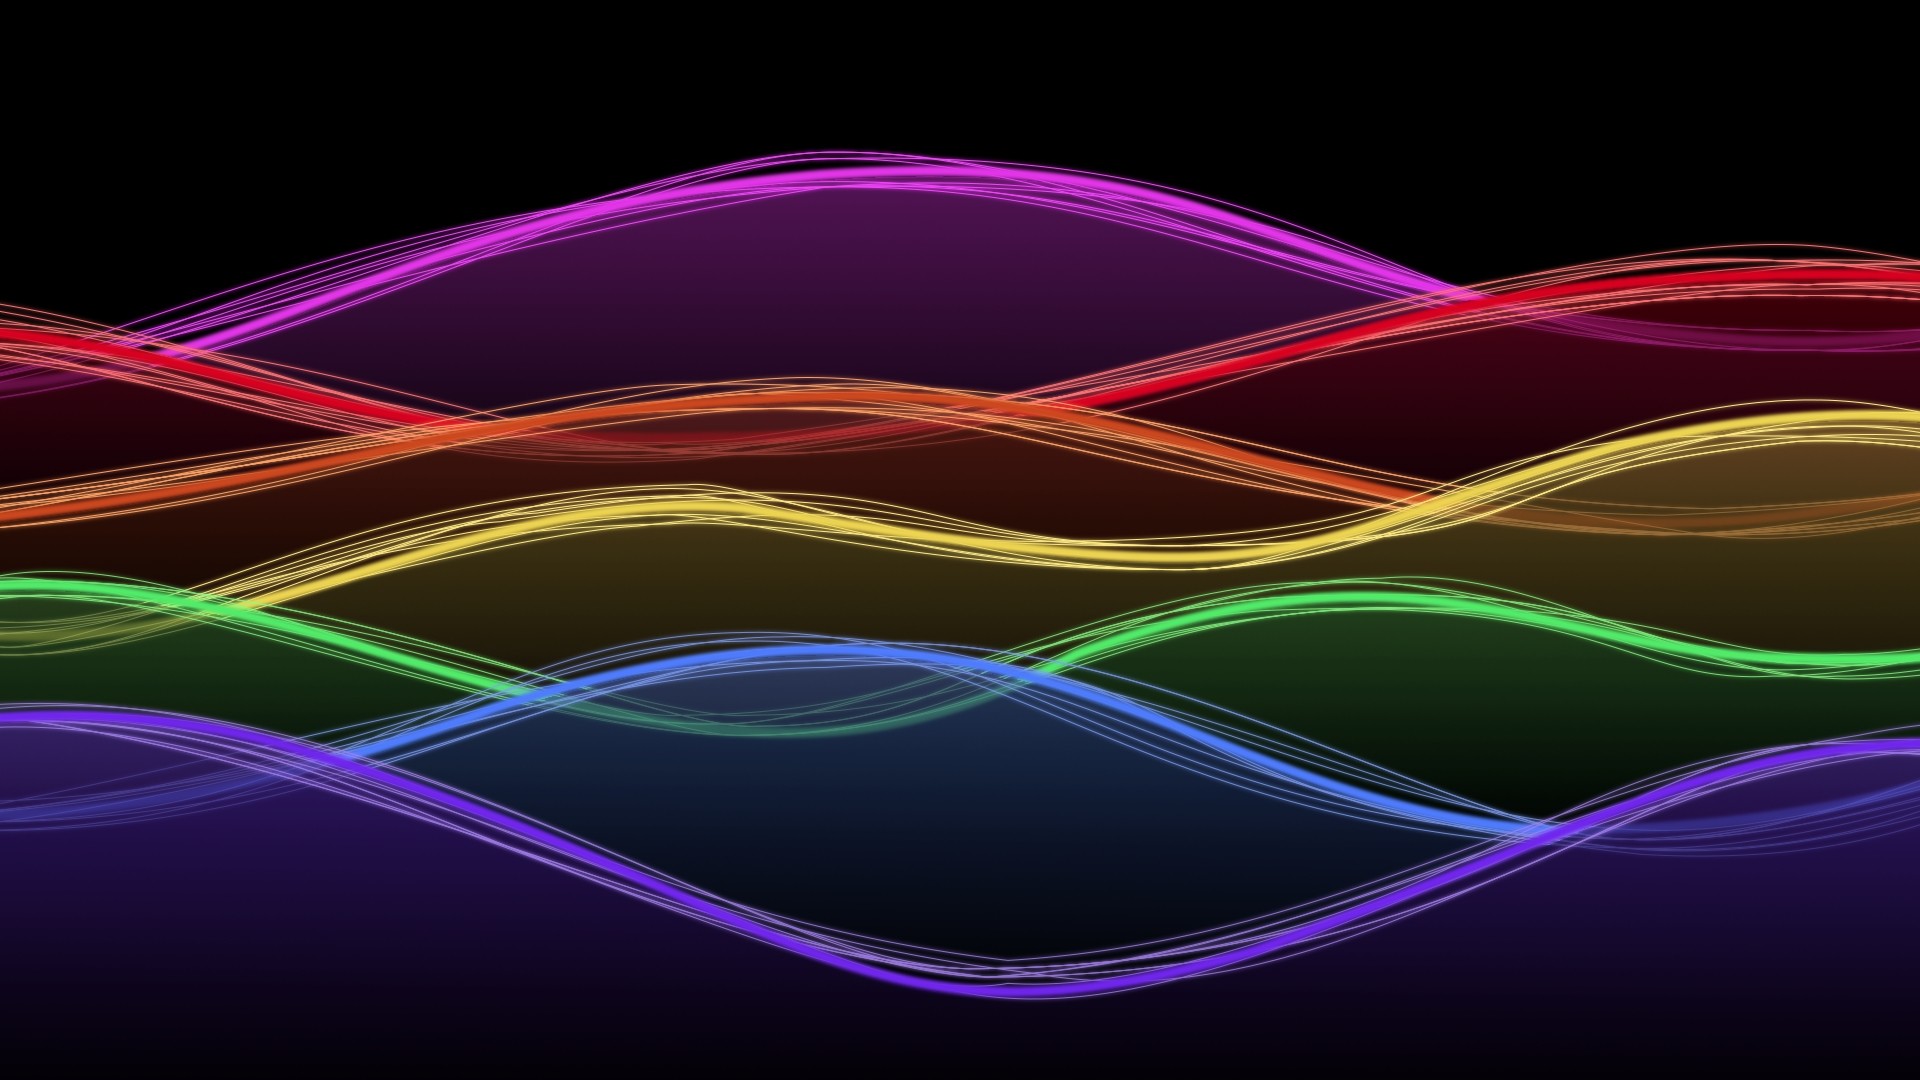 1920x1080 Hd Wave Wallpaper You Are Viewing The Abstract Wallpaper Named Hd Wave